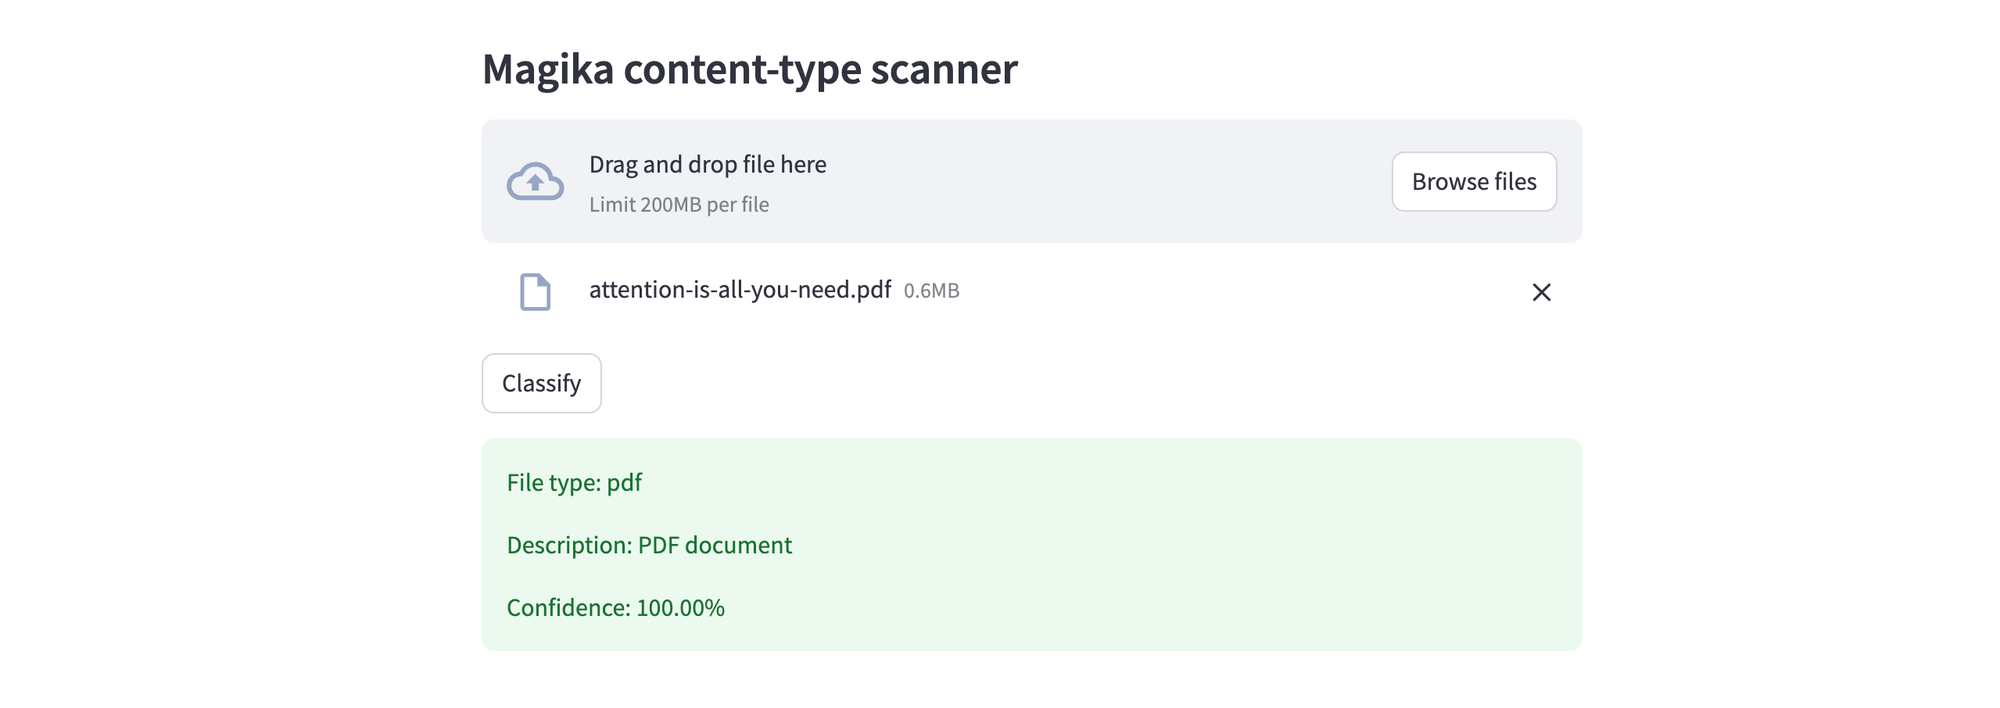 Test Magika content-type scanner using different file types